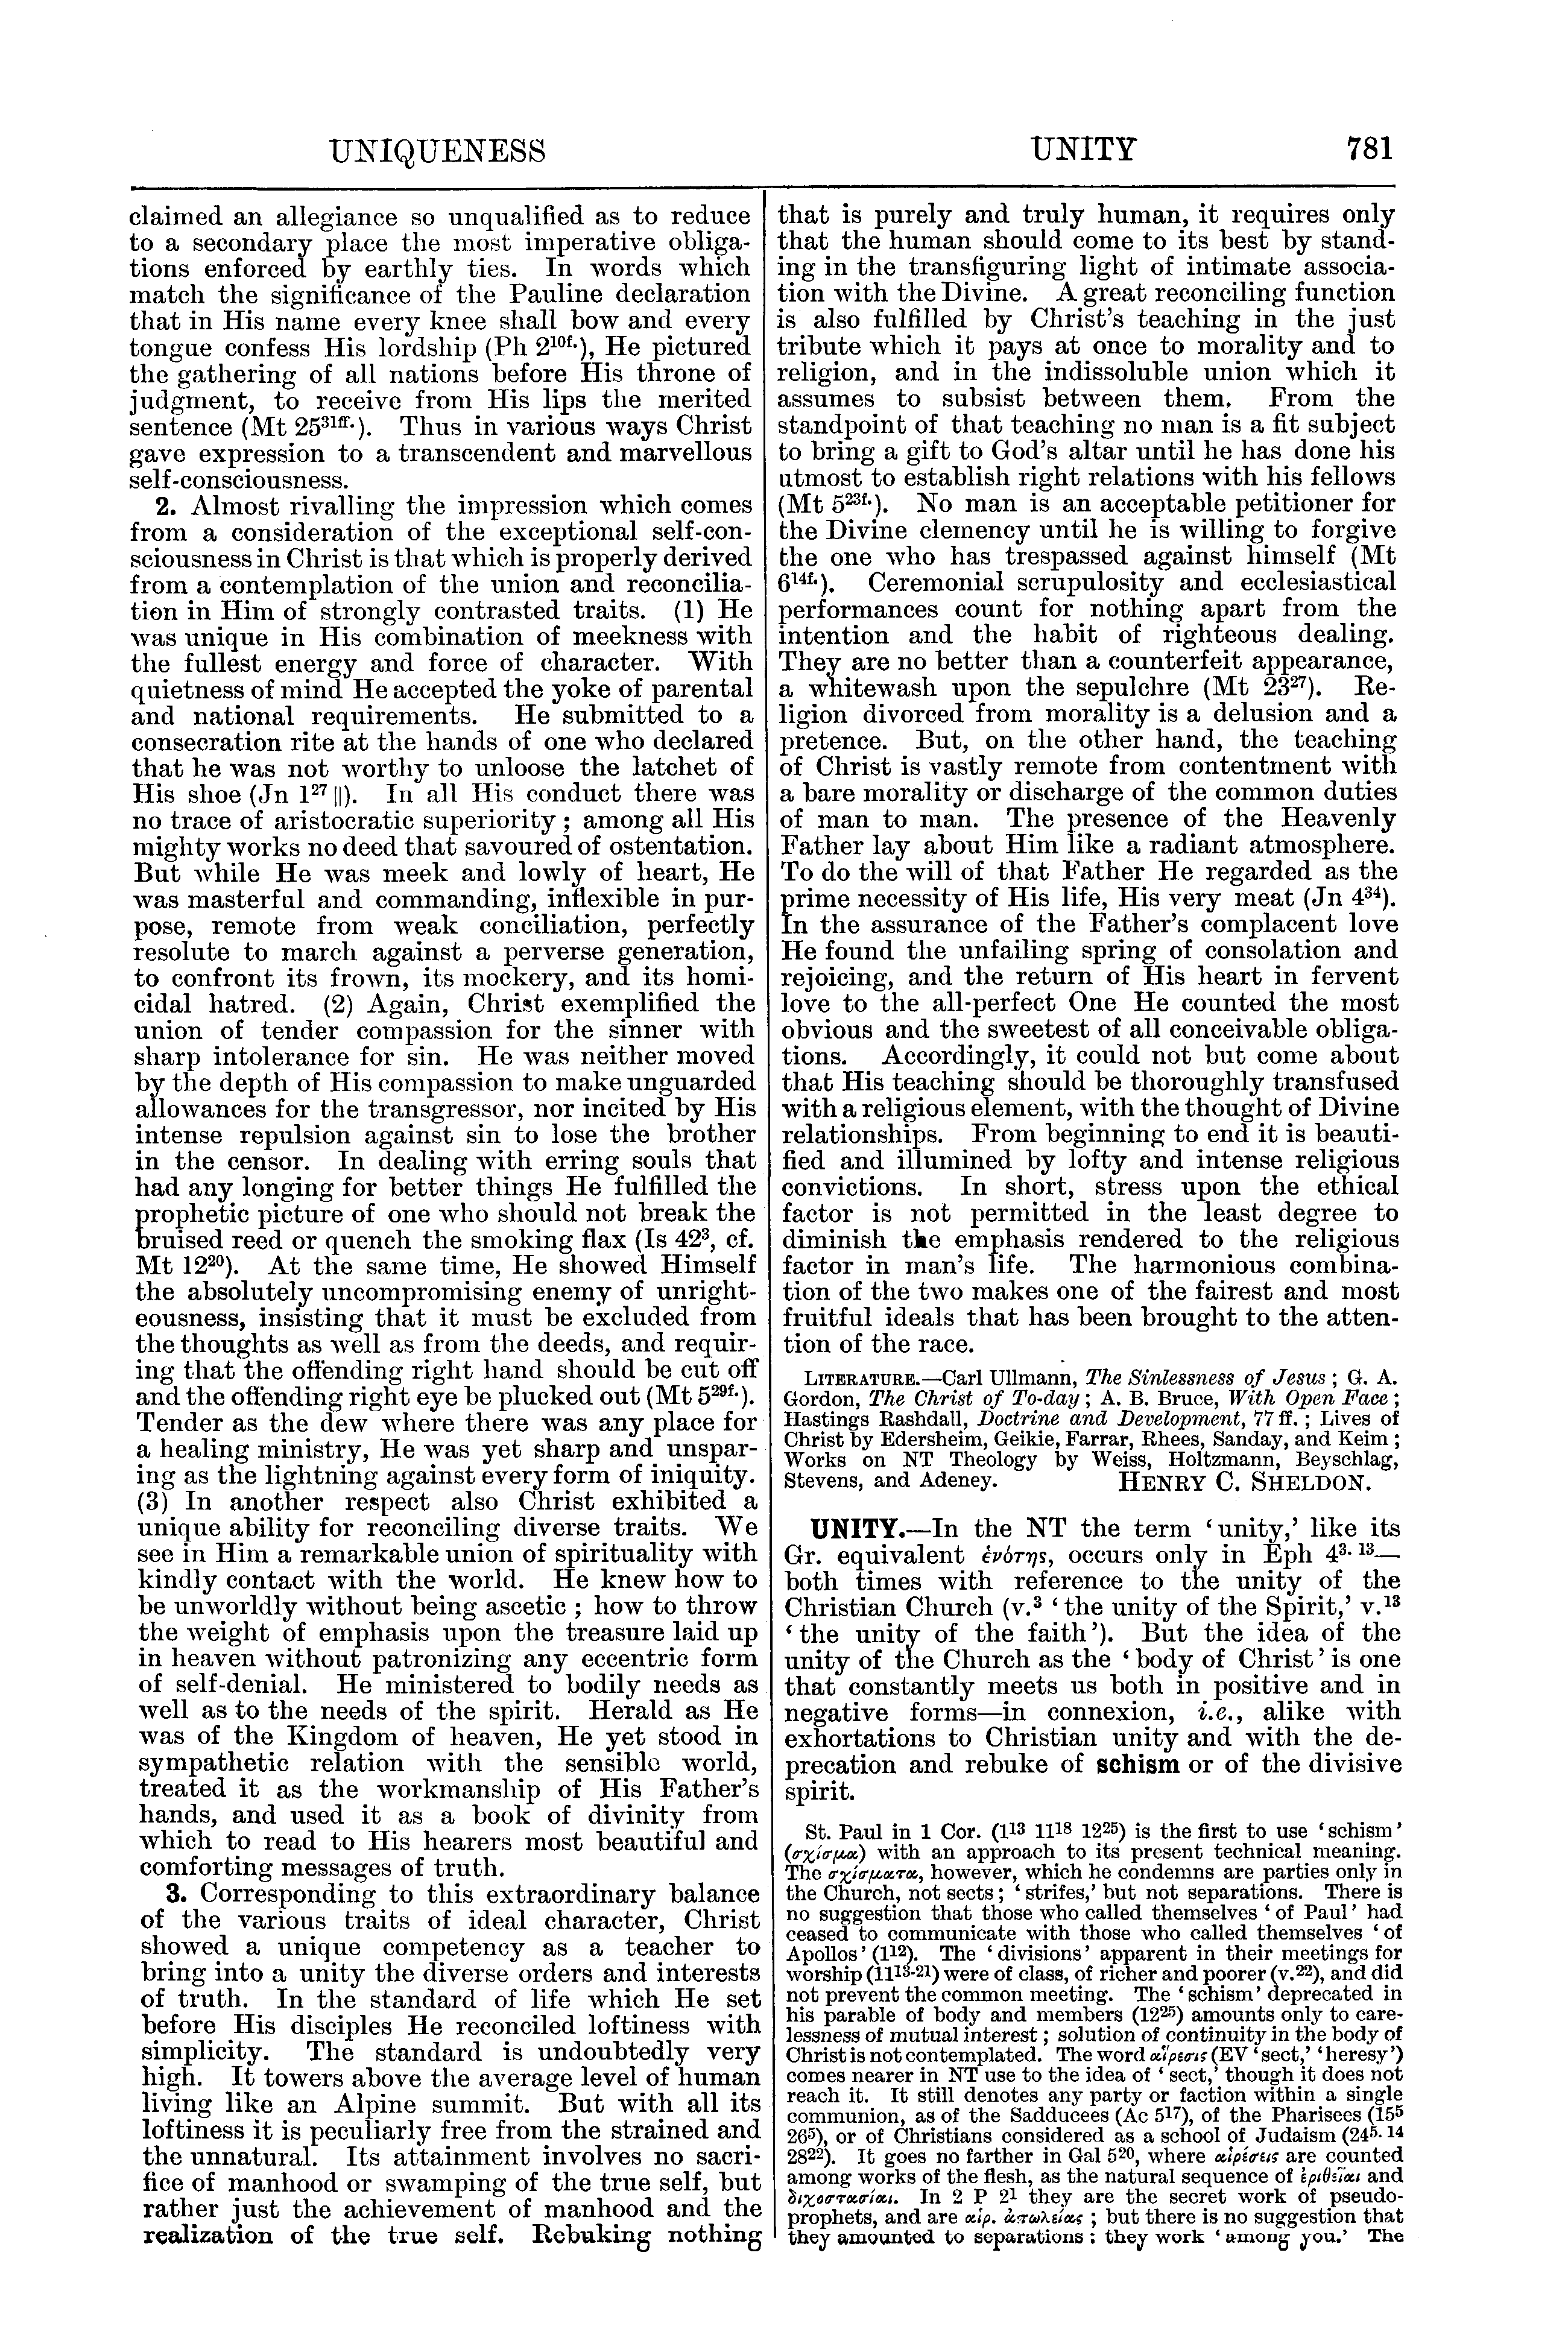 Image of page 781